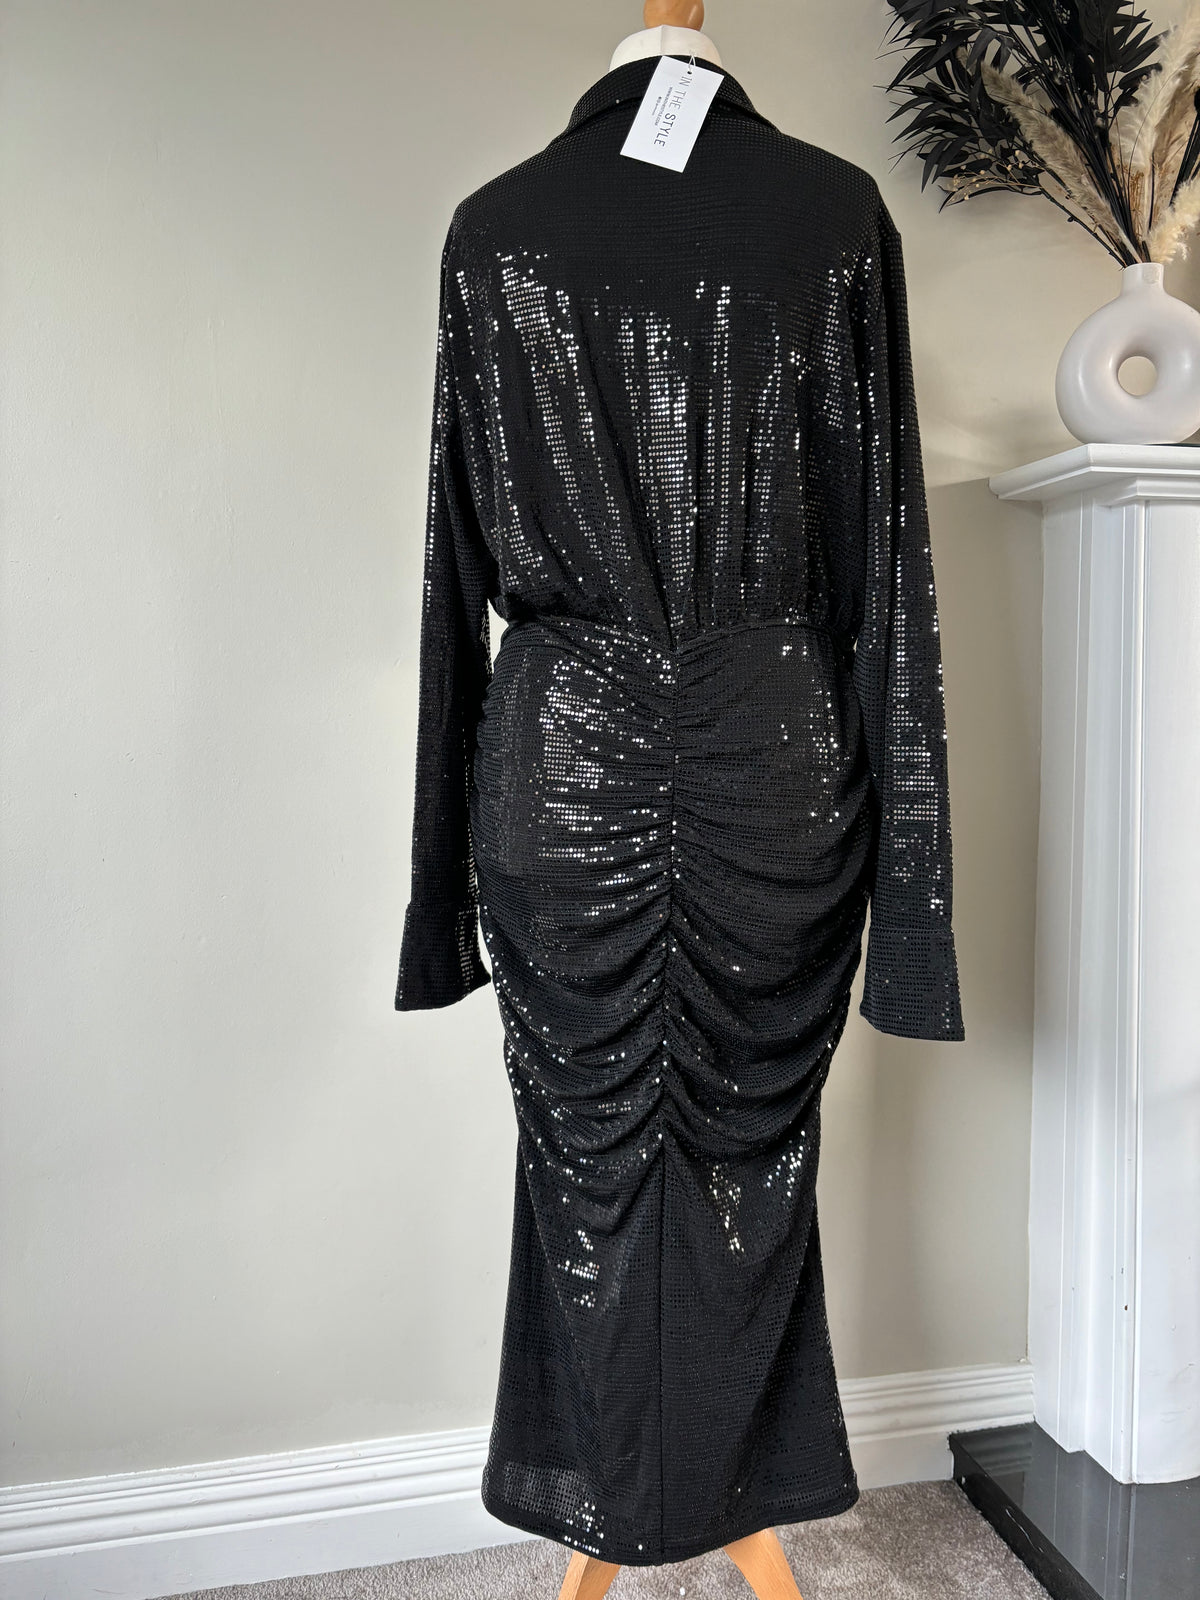 Black Embellished Wrap Midaxi Dress by In The Style Size 18